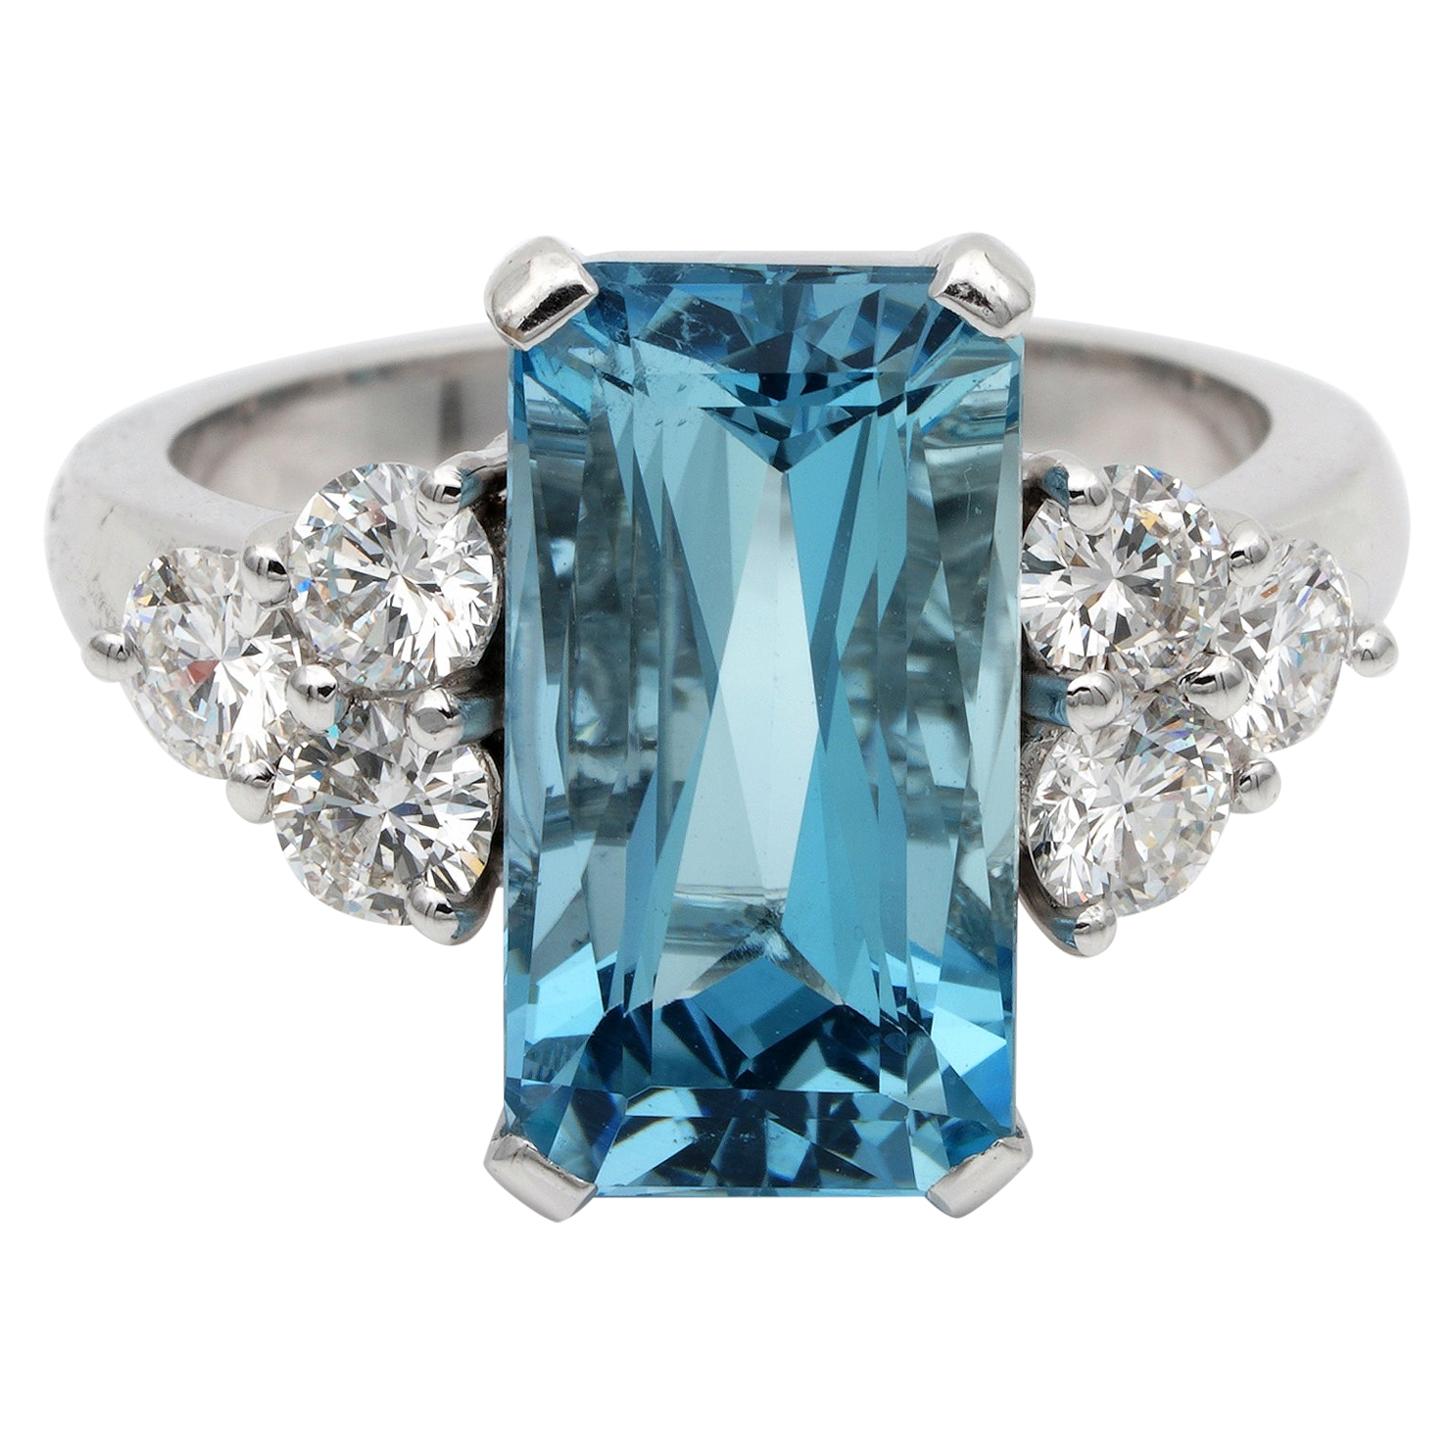 Magnificent 4.70 Carat Aquamarine and Diamond High Quality Engagement Ring For Sale